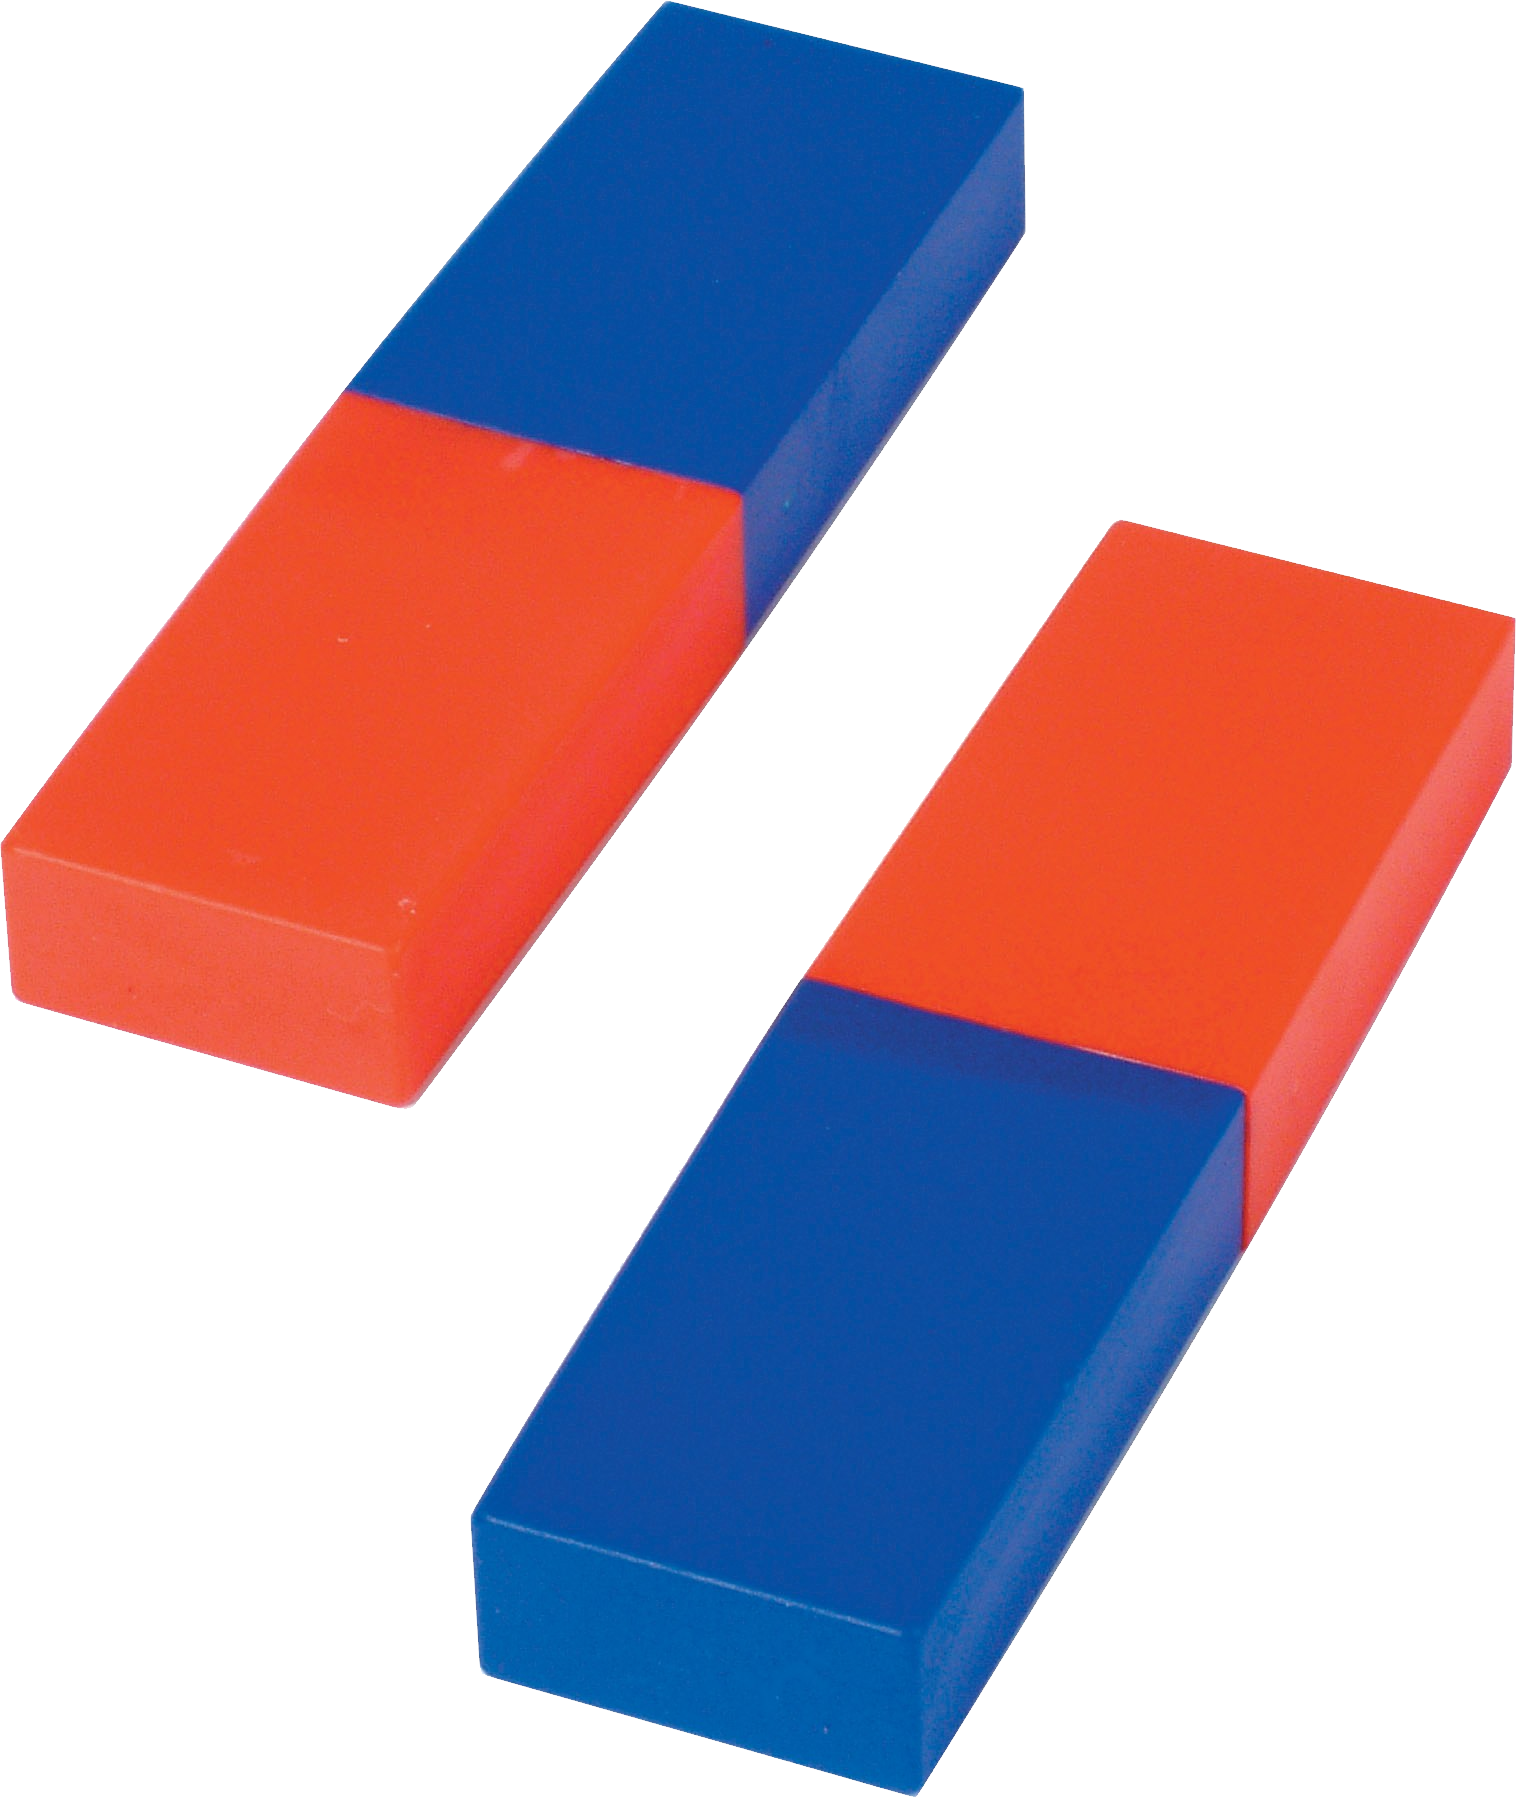 Download - Blue And Red Magnets (1516x1798)